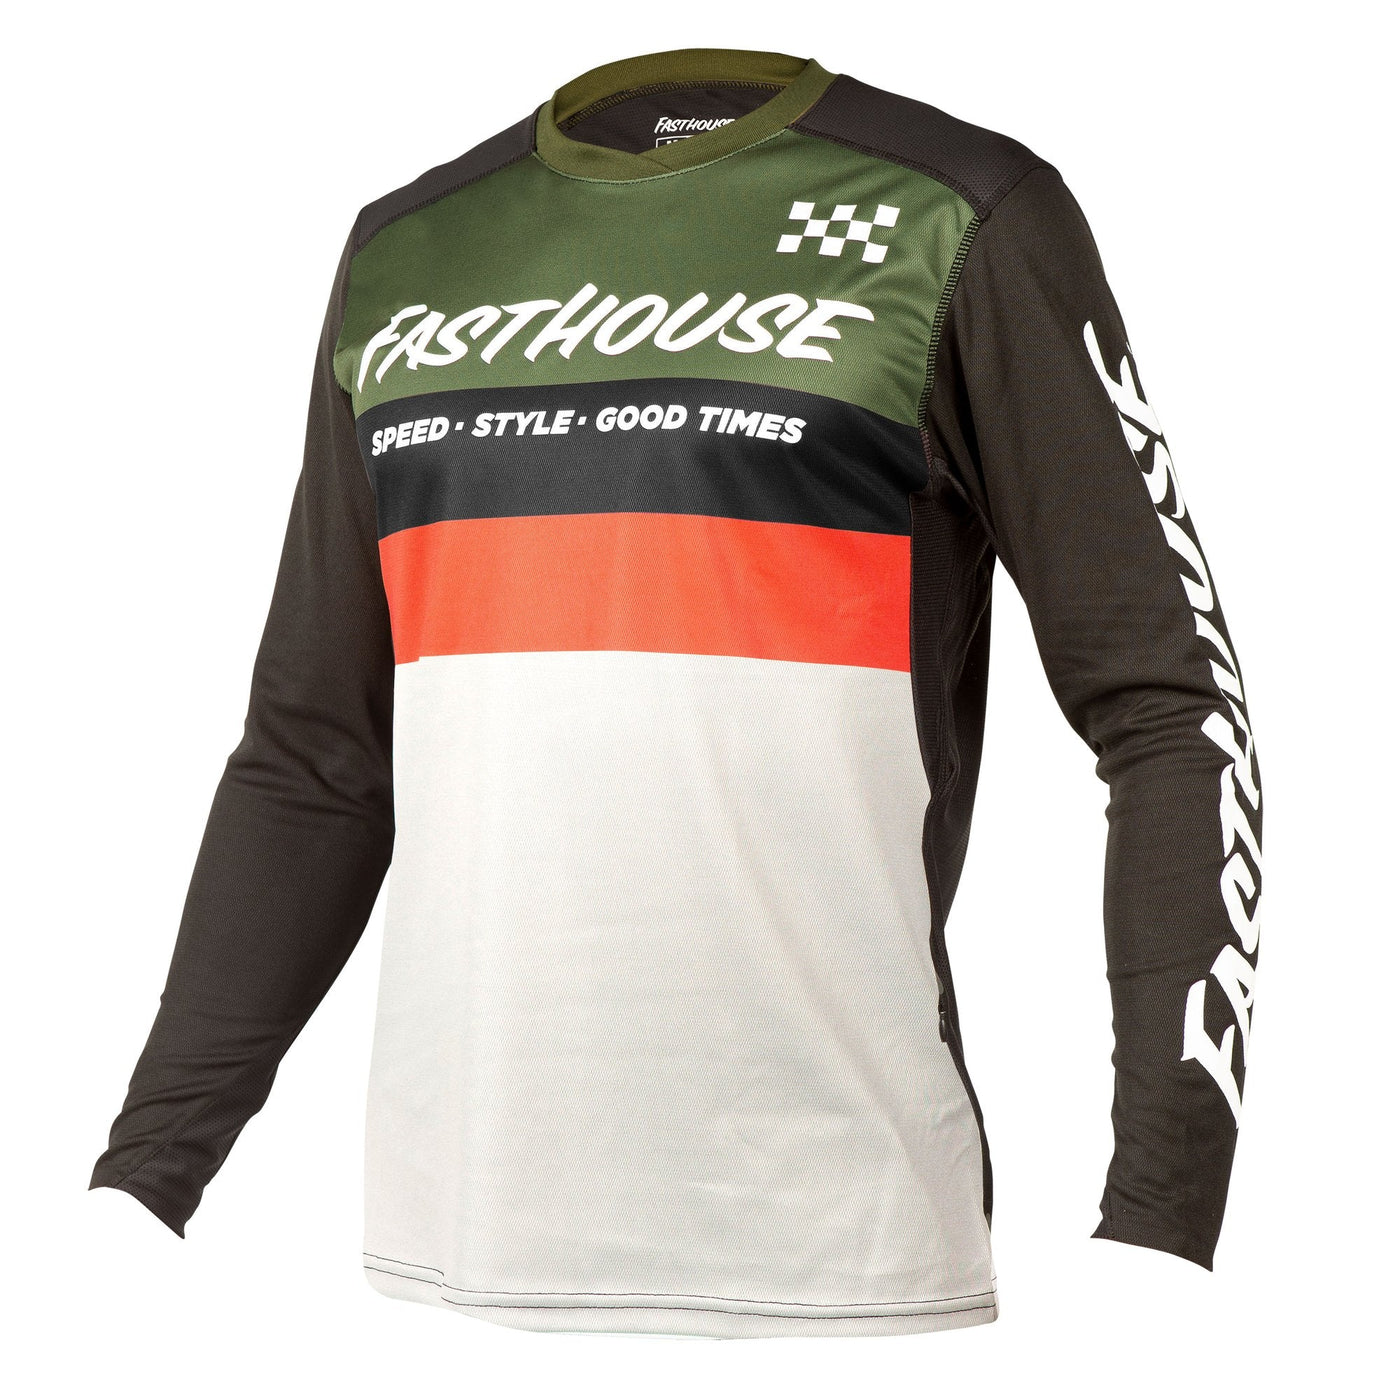 Fasthouse - Alloy Kilo LS Youth Jersey - Olive/White